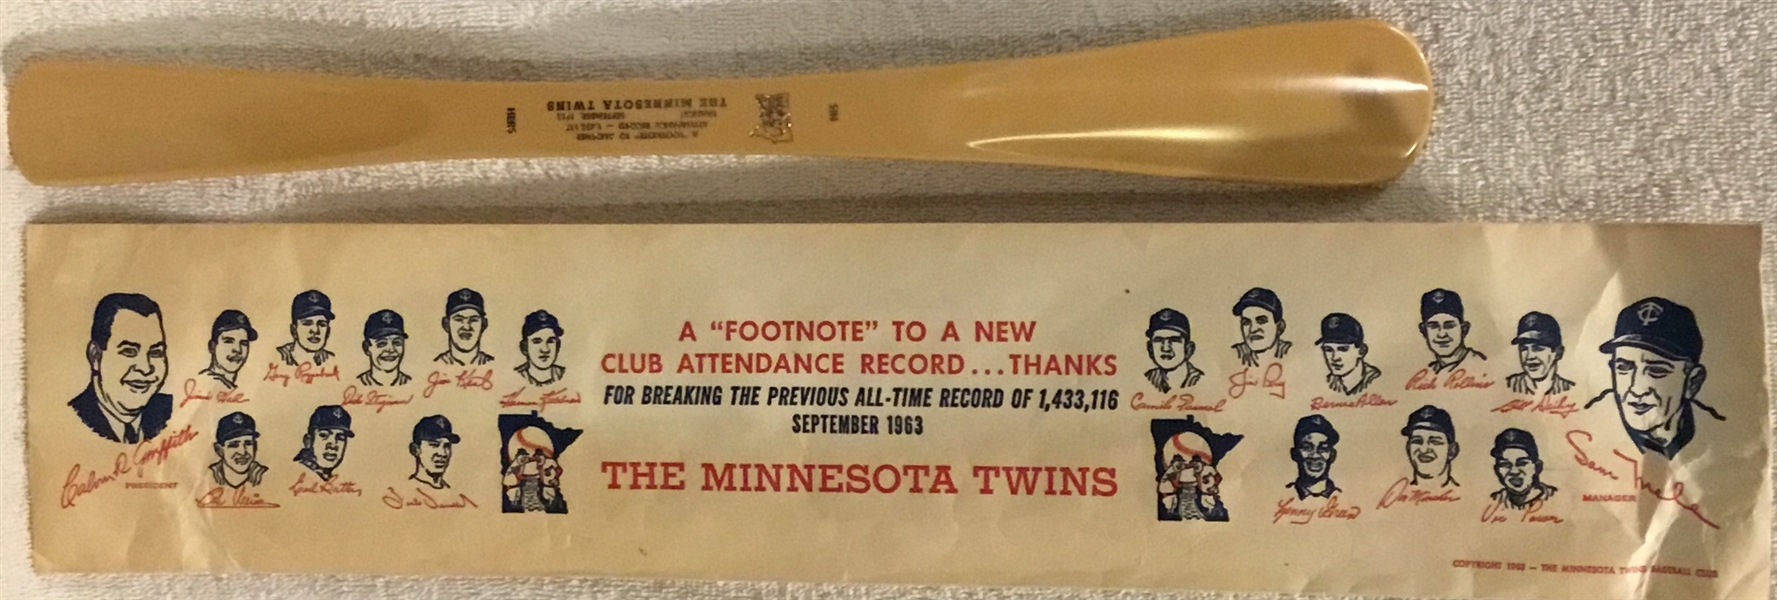 1963 MINNESOTA TWINS GIVE-AWAY SHOEHORN w/PICTURE ENVELOPE